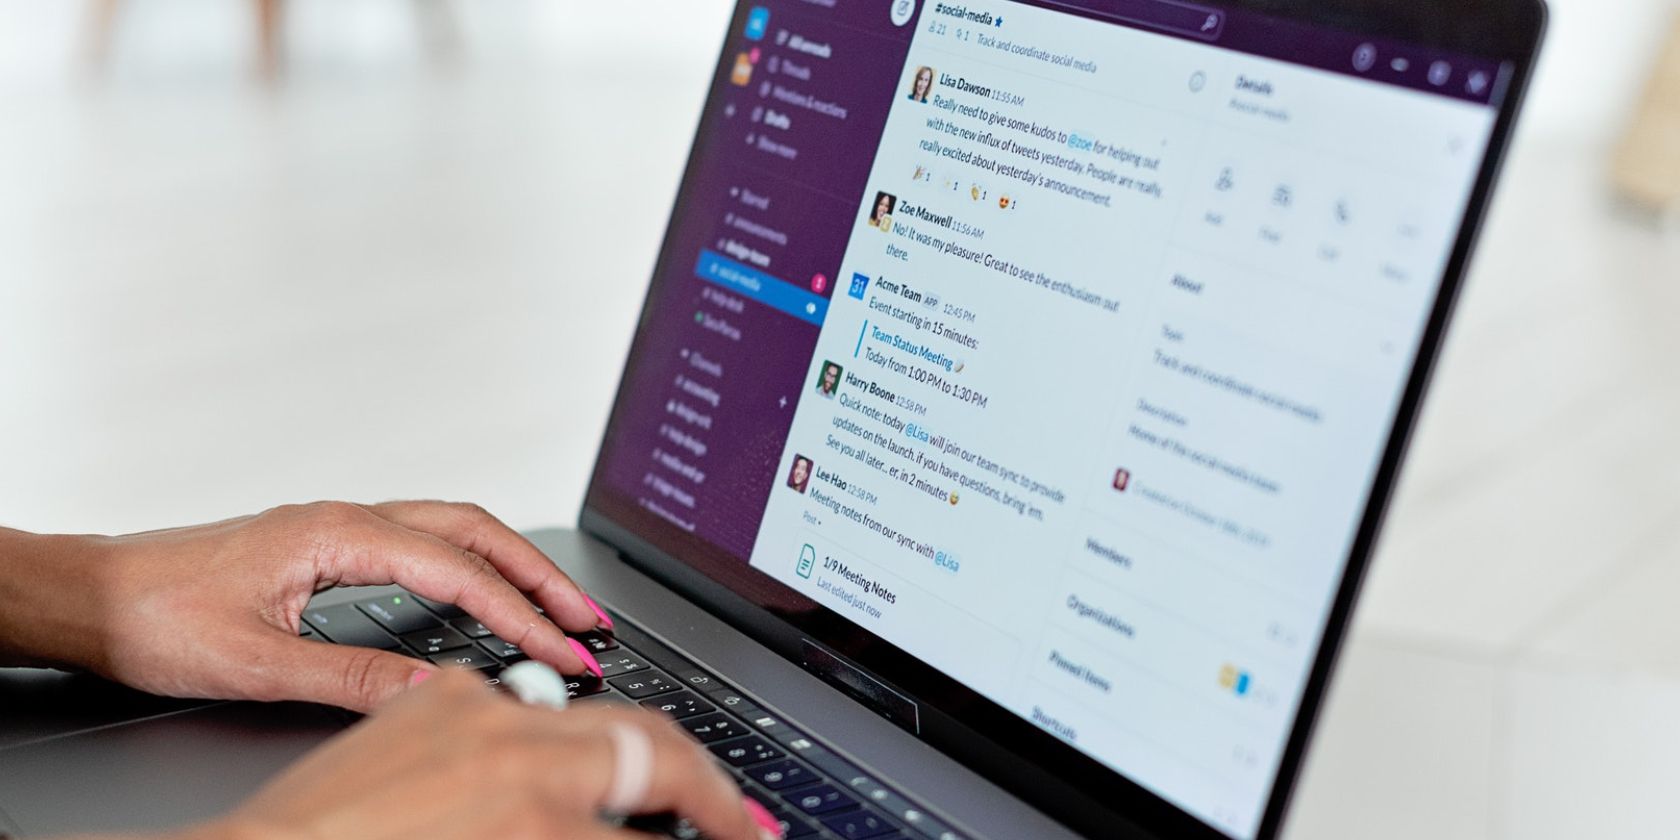 Image shows a woman using Slack on a laptop